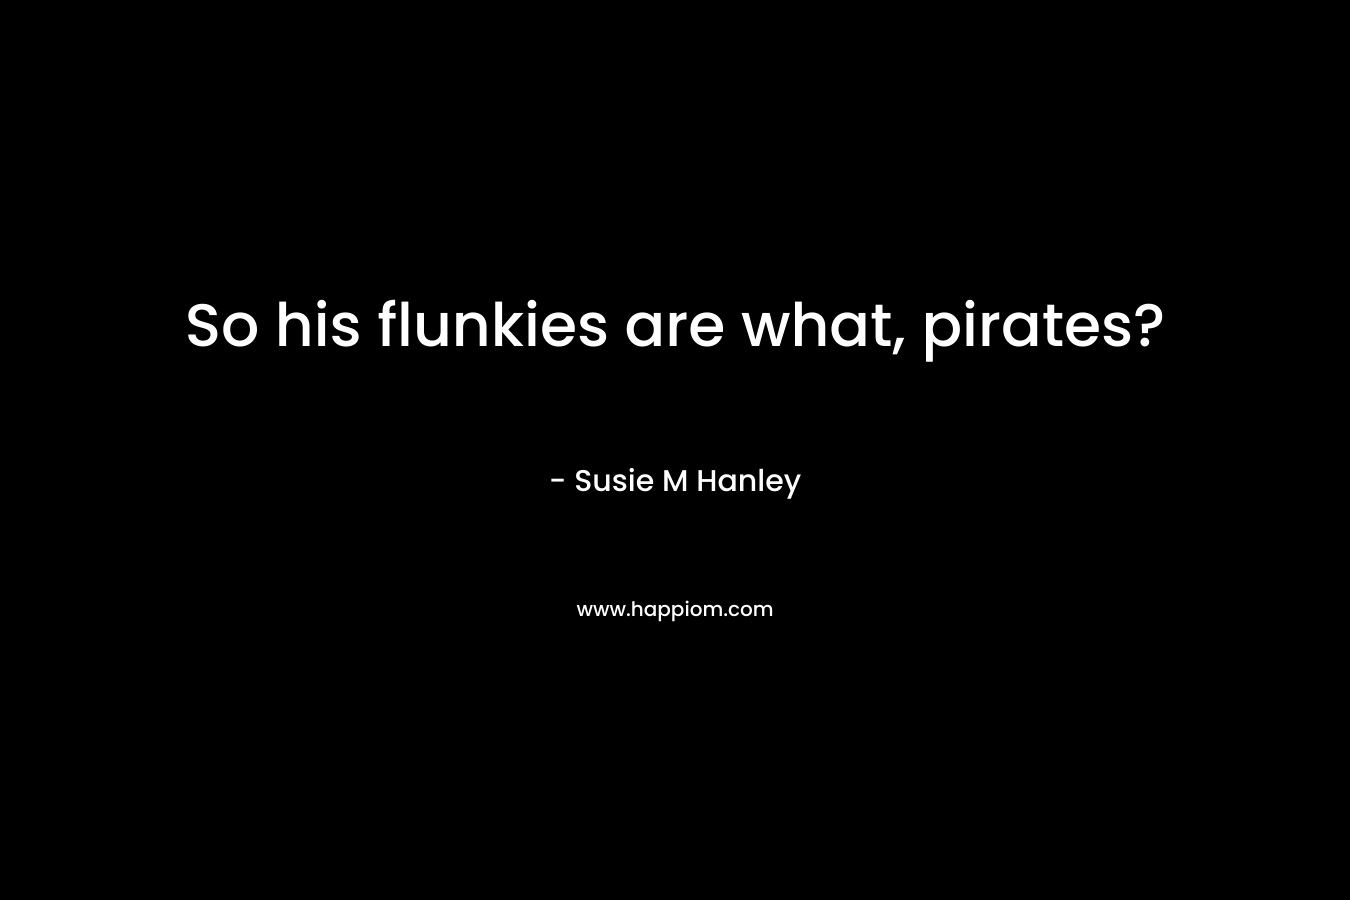 So his flunkies are what, pirates?